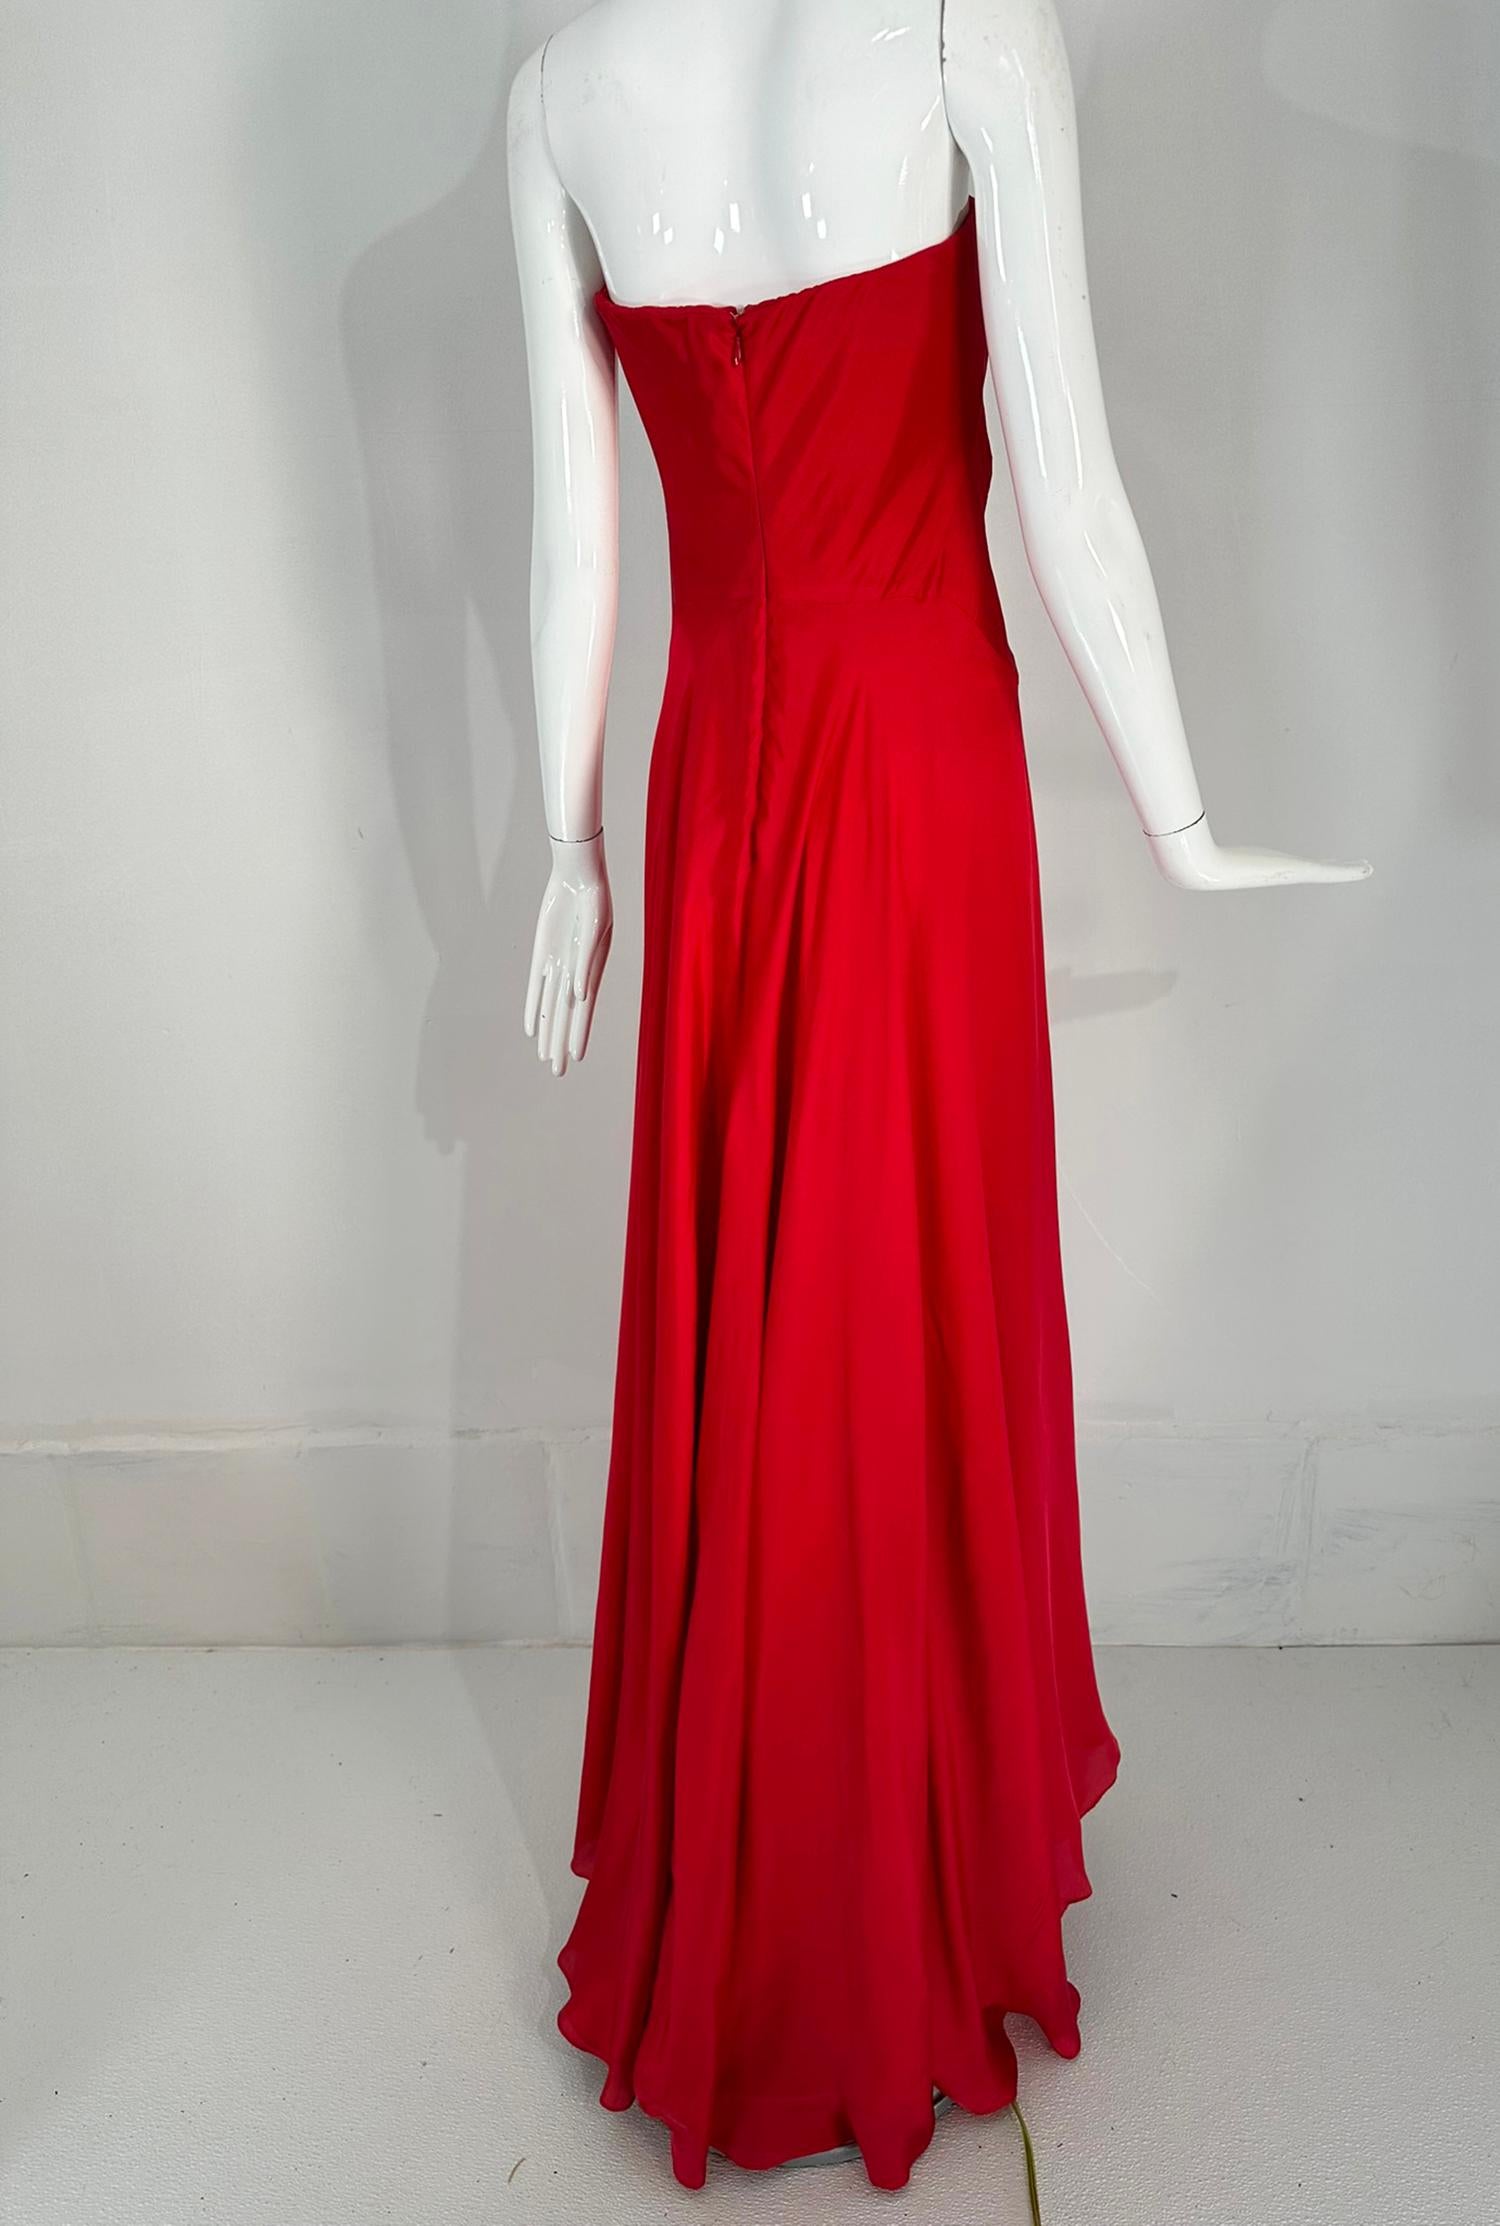 Ralph Lauren Collection Draped Red Silk Strapless Evening Gown 6 For Sale 4